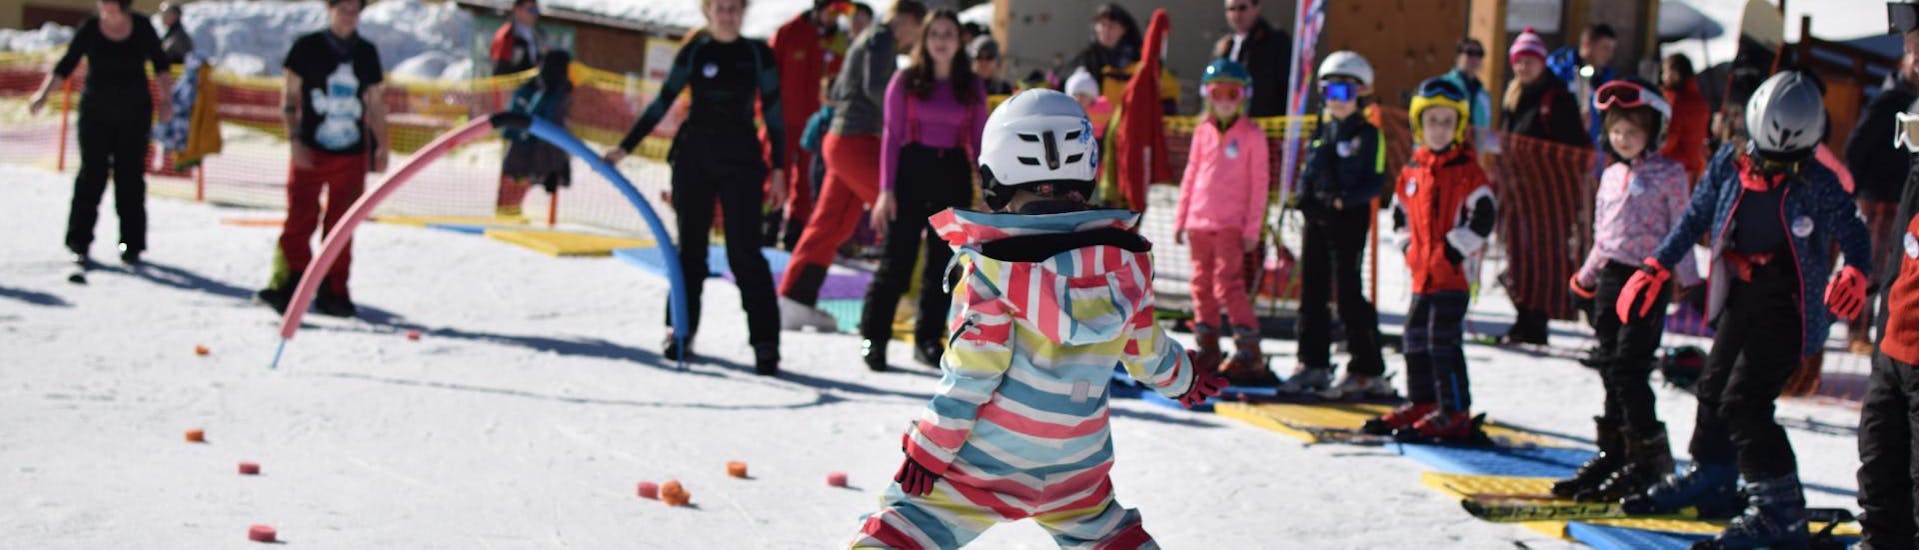 ski-lessons-for-kids---small-group---all-levels-hero